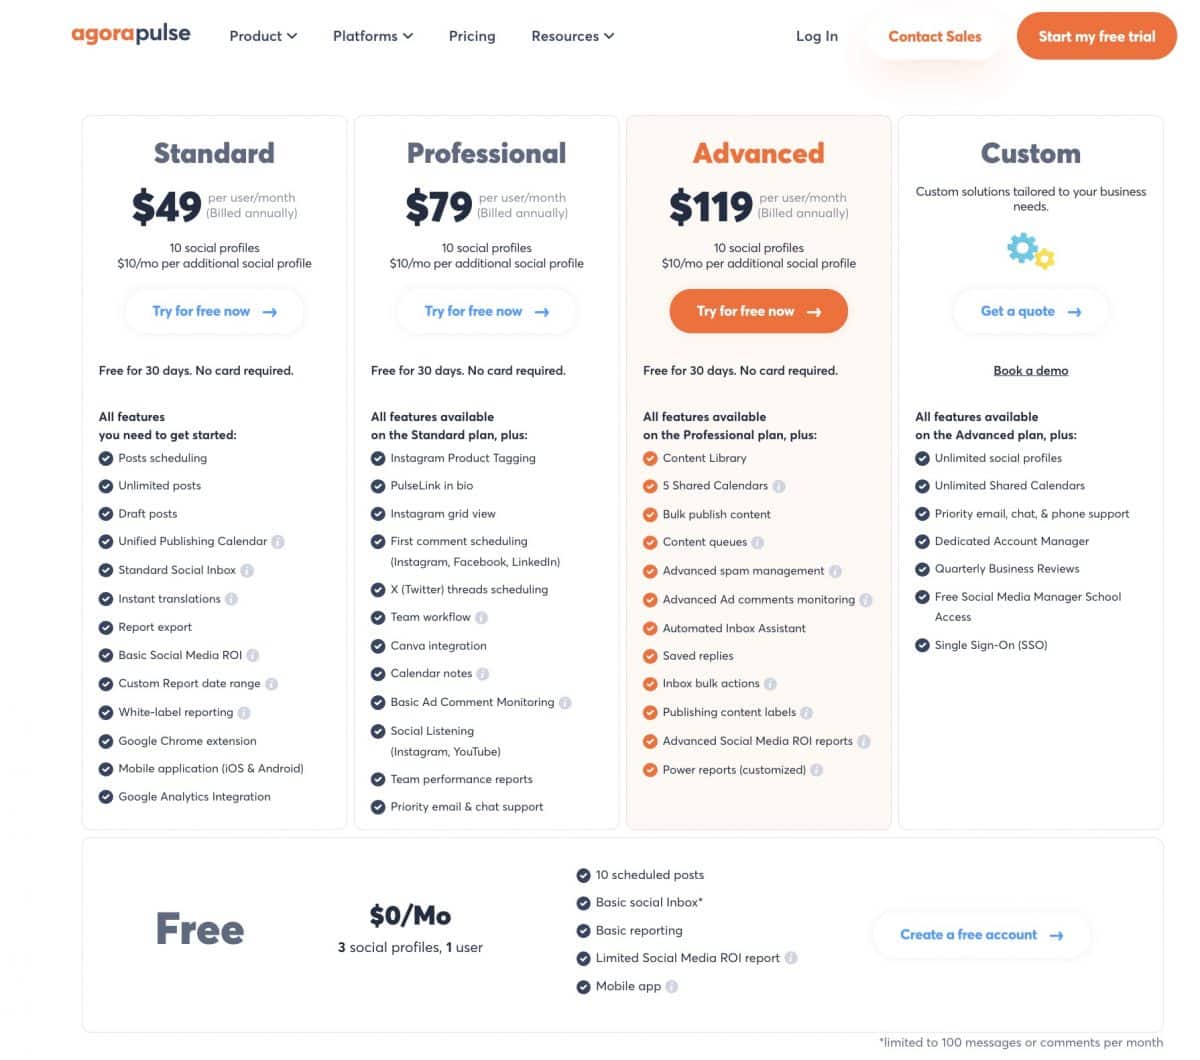 Agorapulse pricing and plans chart